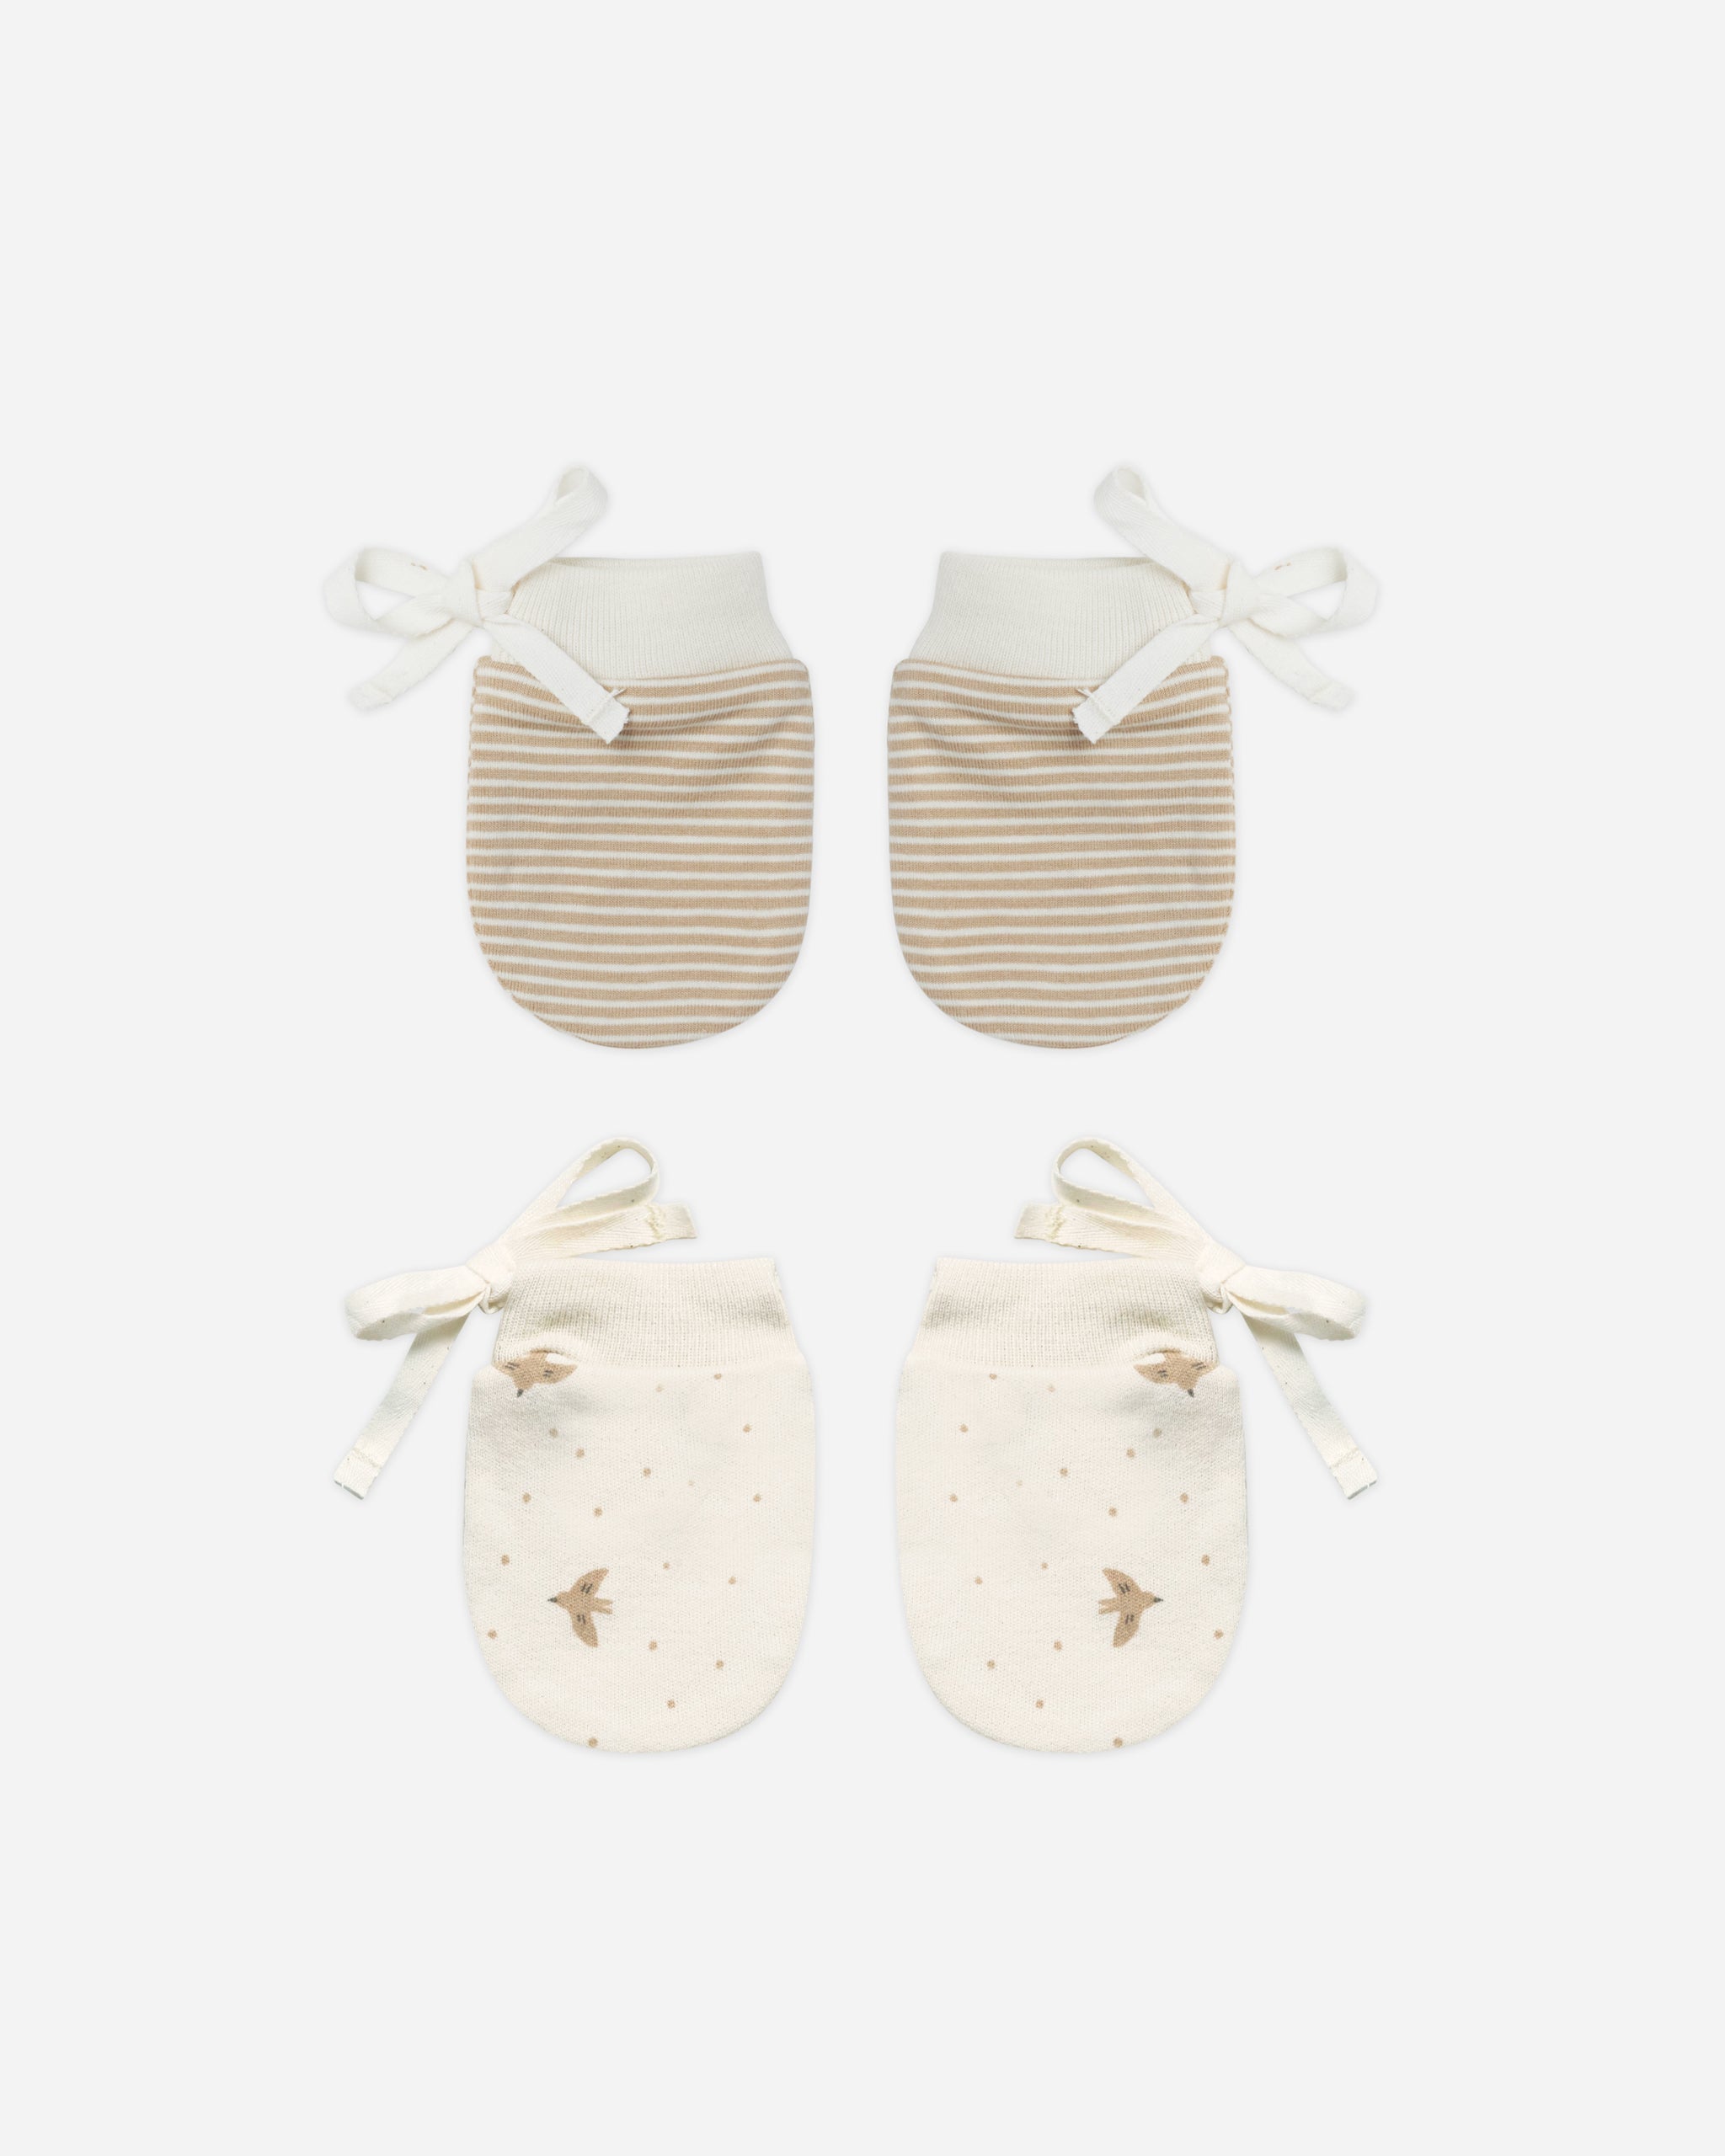 No Scratch Mittens || Doves, Latte Micro Stripe - Rylee + Cru | Kids Clothes | Trendy Baby Clothes | Modern Infant Outfits |